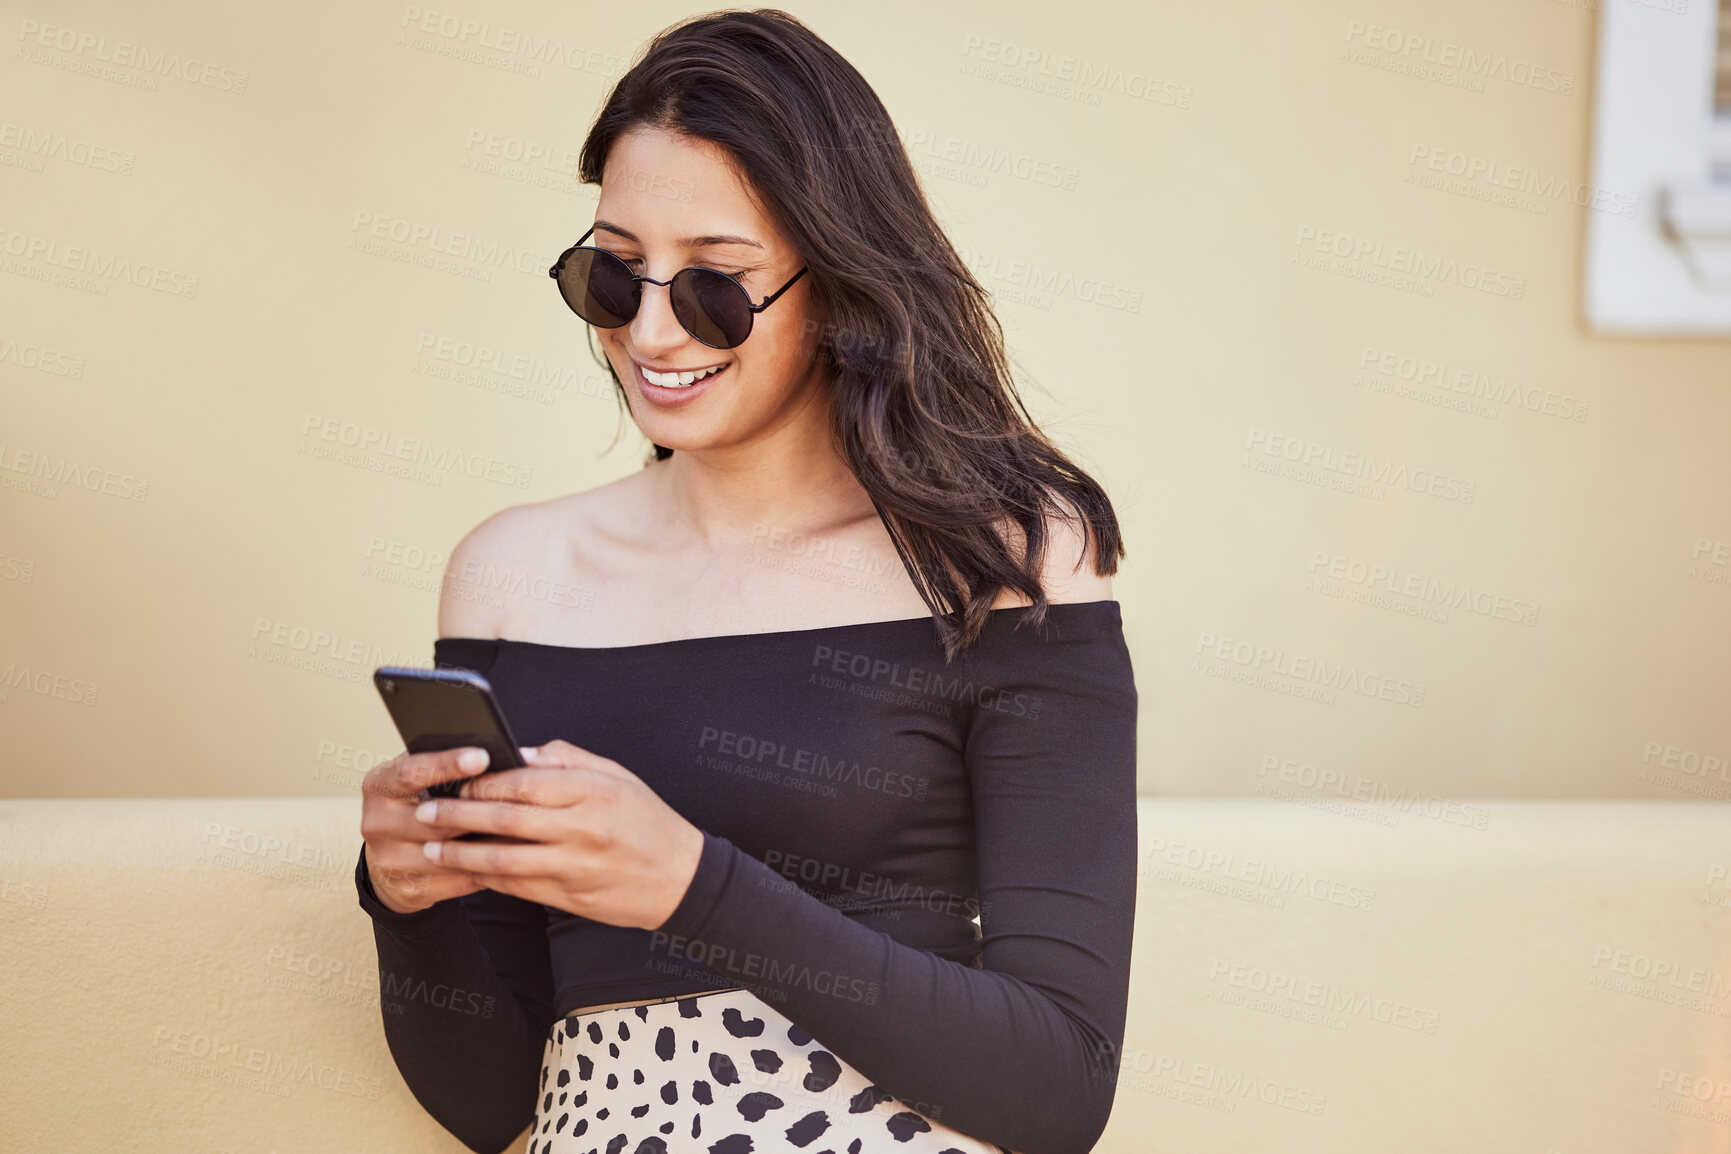 Buy stock photo Fashionable young mixed race woman with sunglasses using her smartphone while standing on sidewalk. Millennial woman sending a text or chatting on social media while on city street